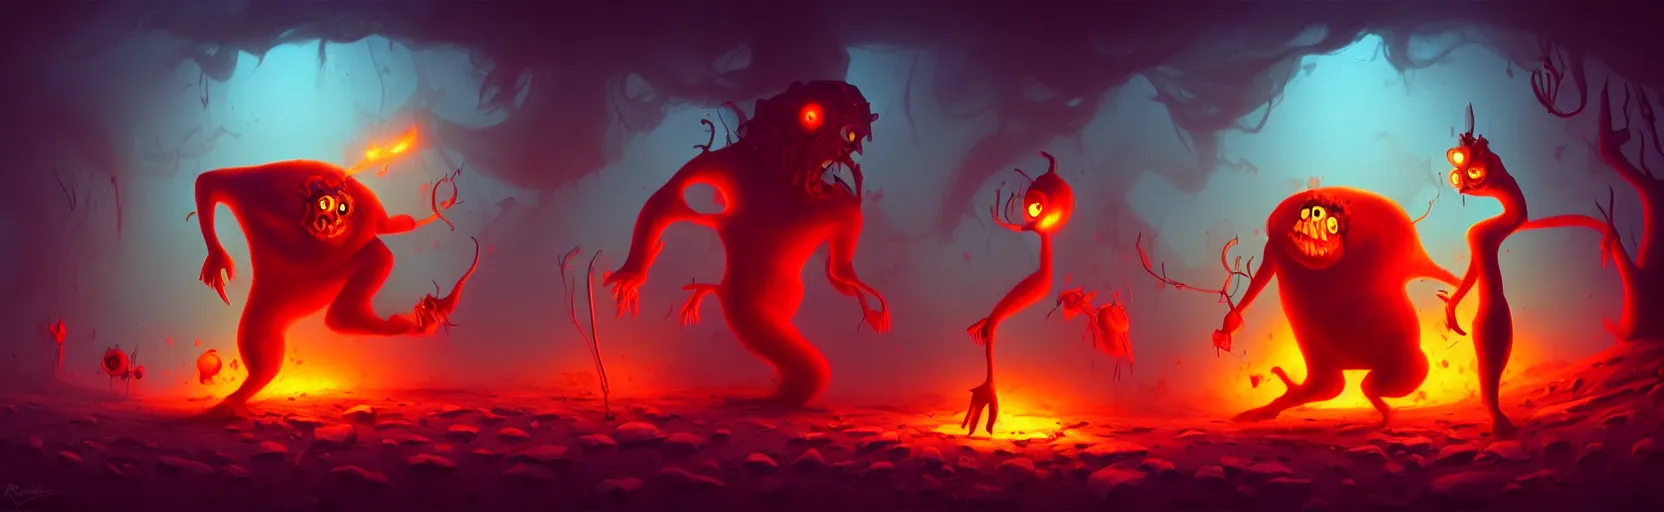 Prompt: wild whimsical fiery mutants from the depths of a wasteland deep in the imaginal realm, dramatic lighting, surreal fleischer cartoon characters, shallow dof, surreal painting by ronny khalil